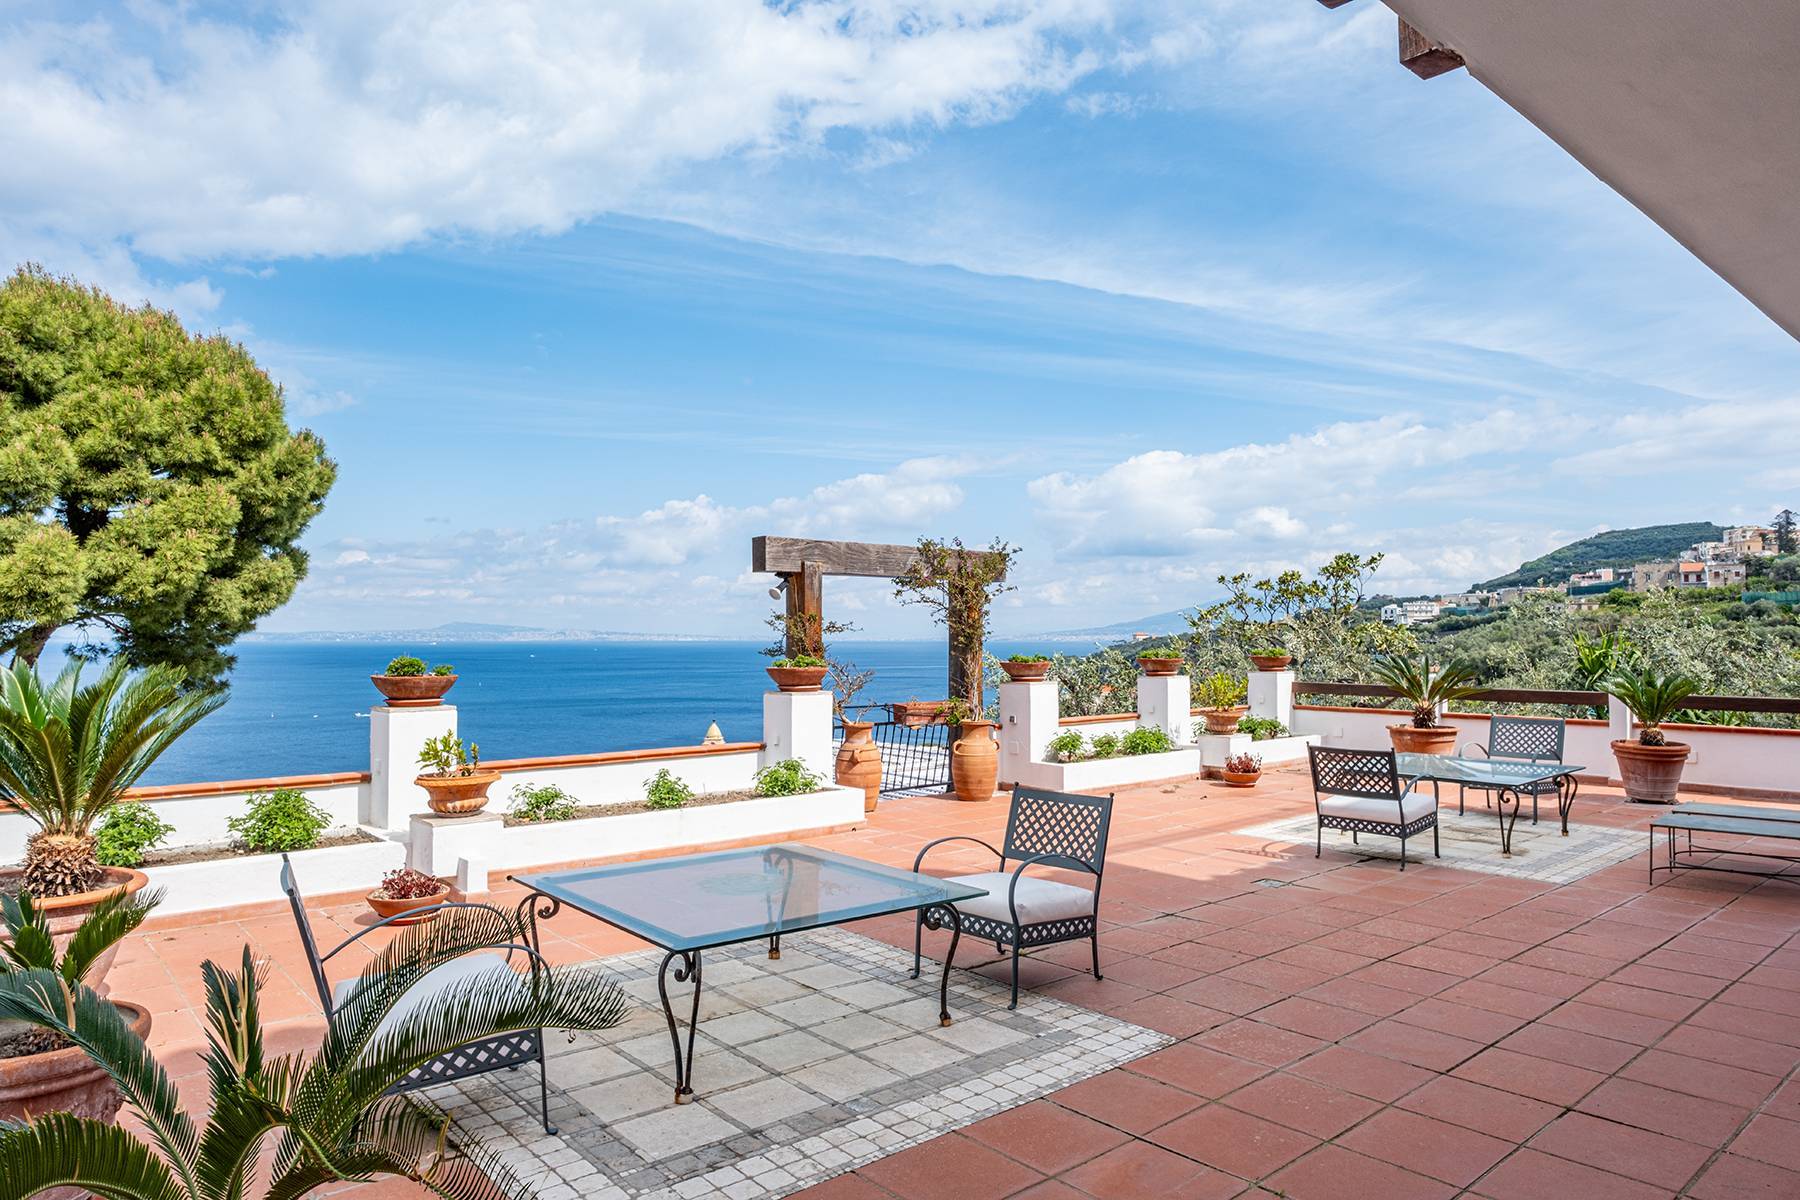 Panoramic villa with pool and garden in the heart of the Sorrento Coast